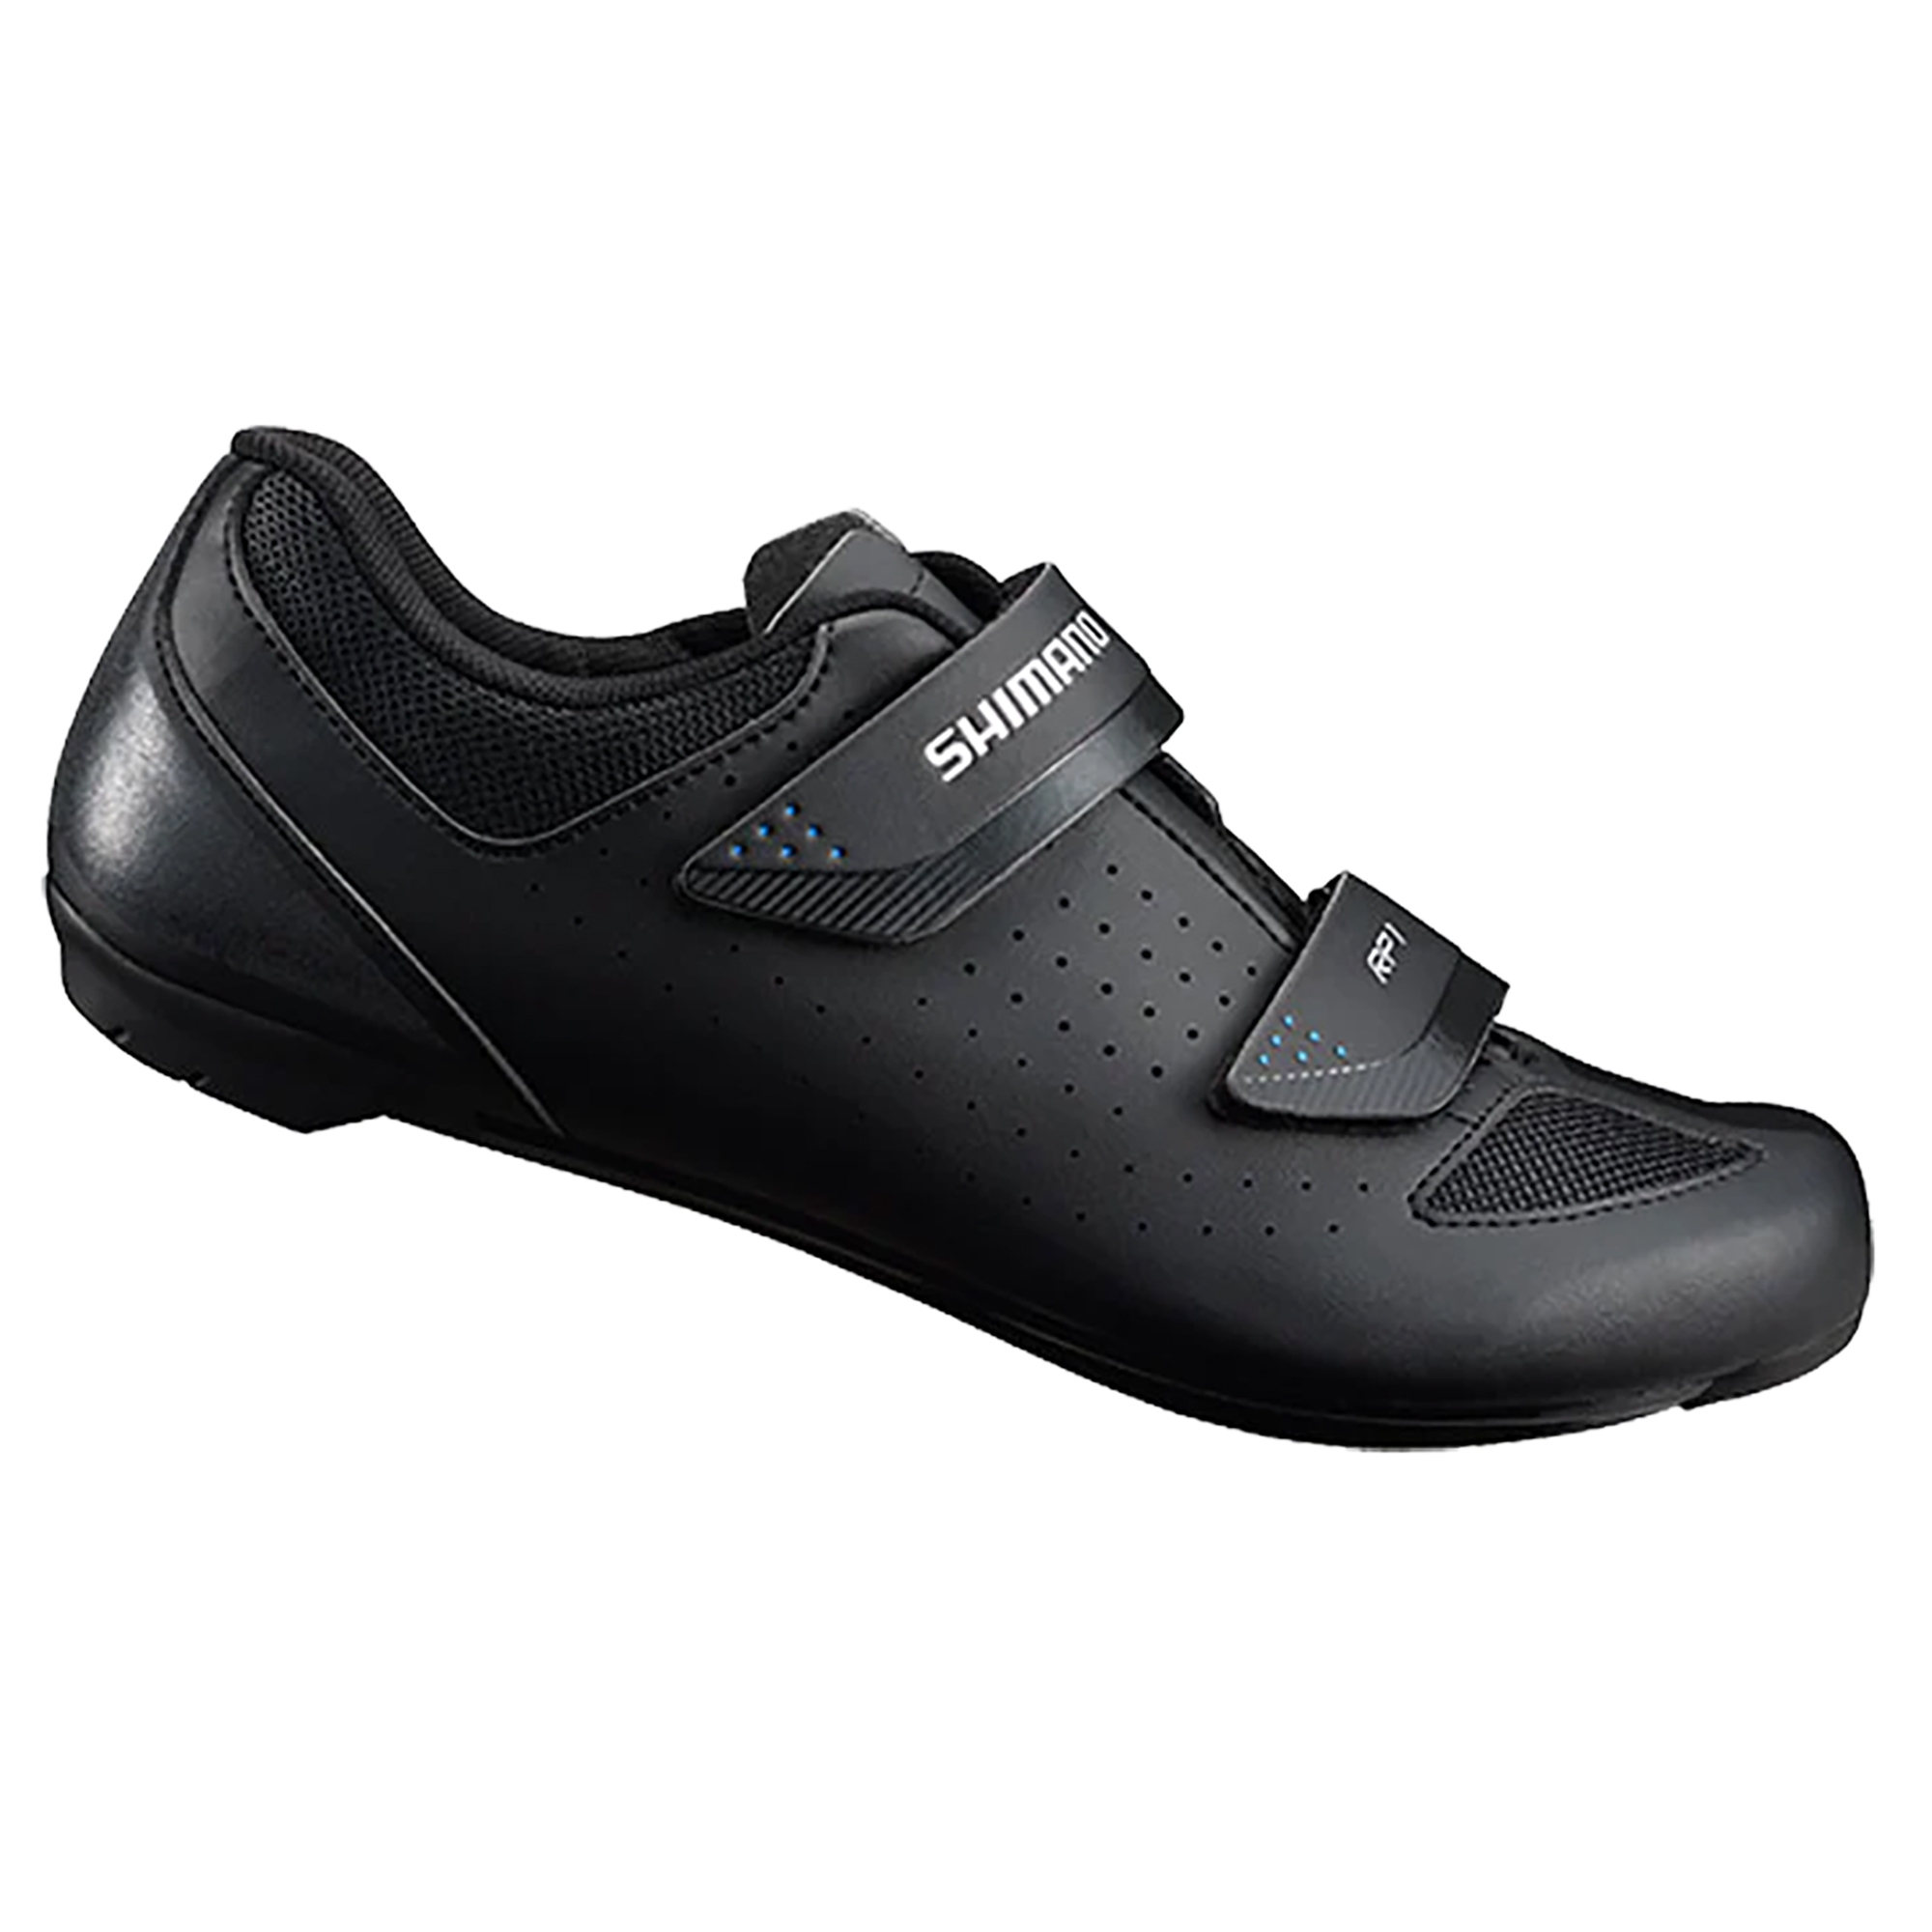 Shimano RP1 Road Bicycle Shoes For SPD SL Black Size 37